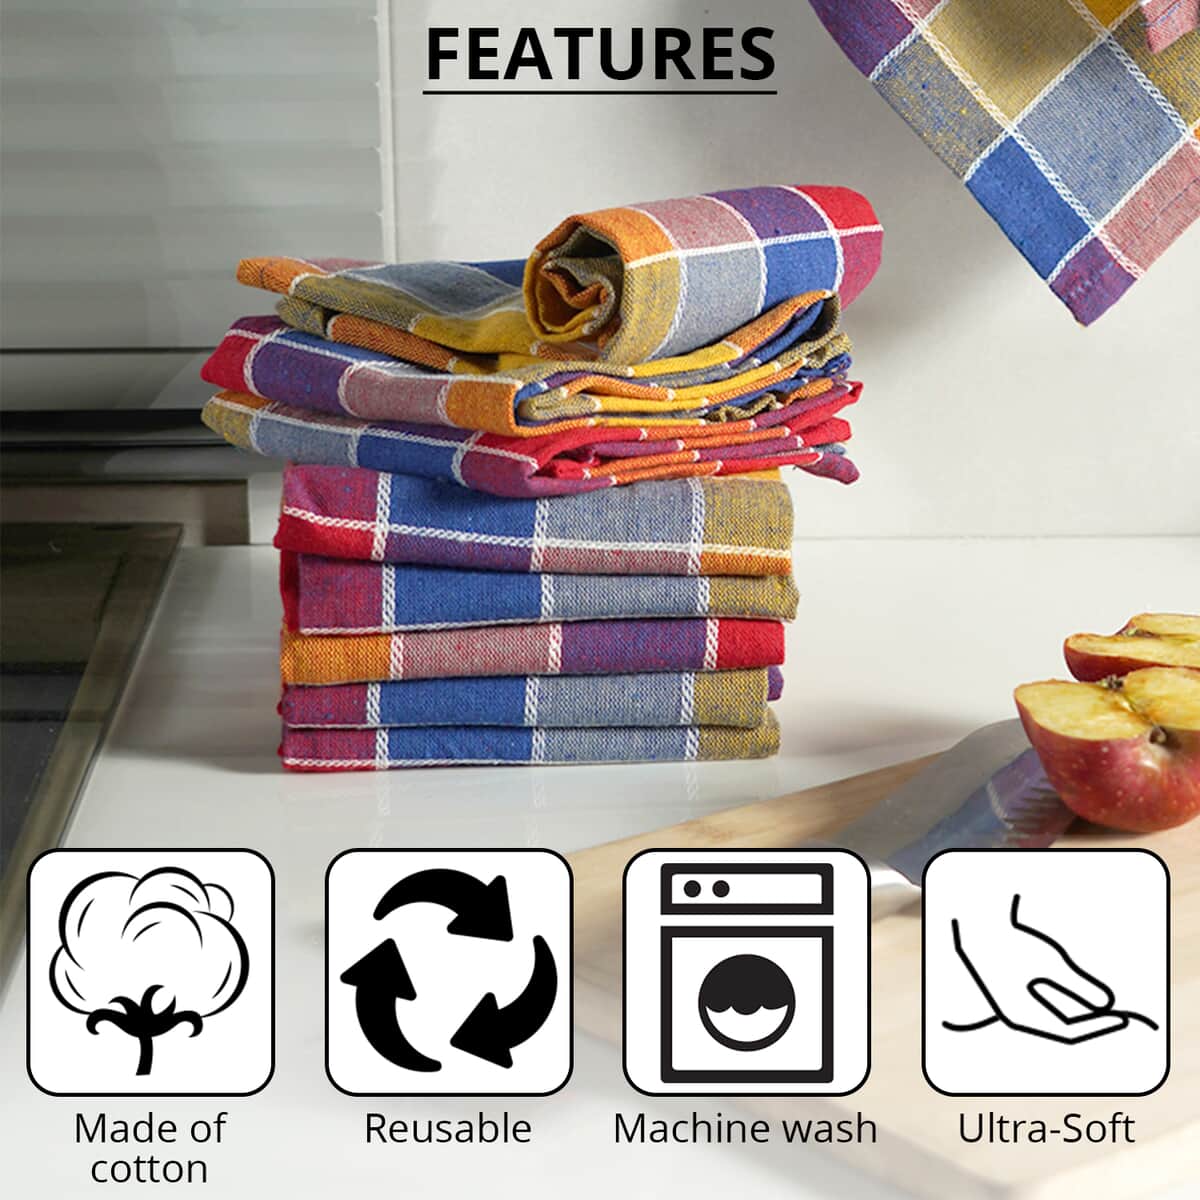 Buy Set of 10 Red Checked Cotton Kitchen Towels at ShopLC.